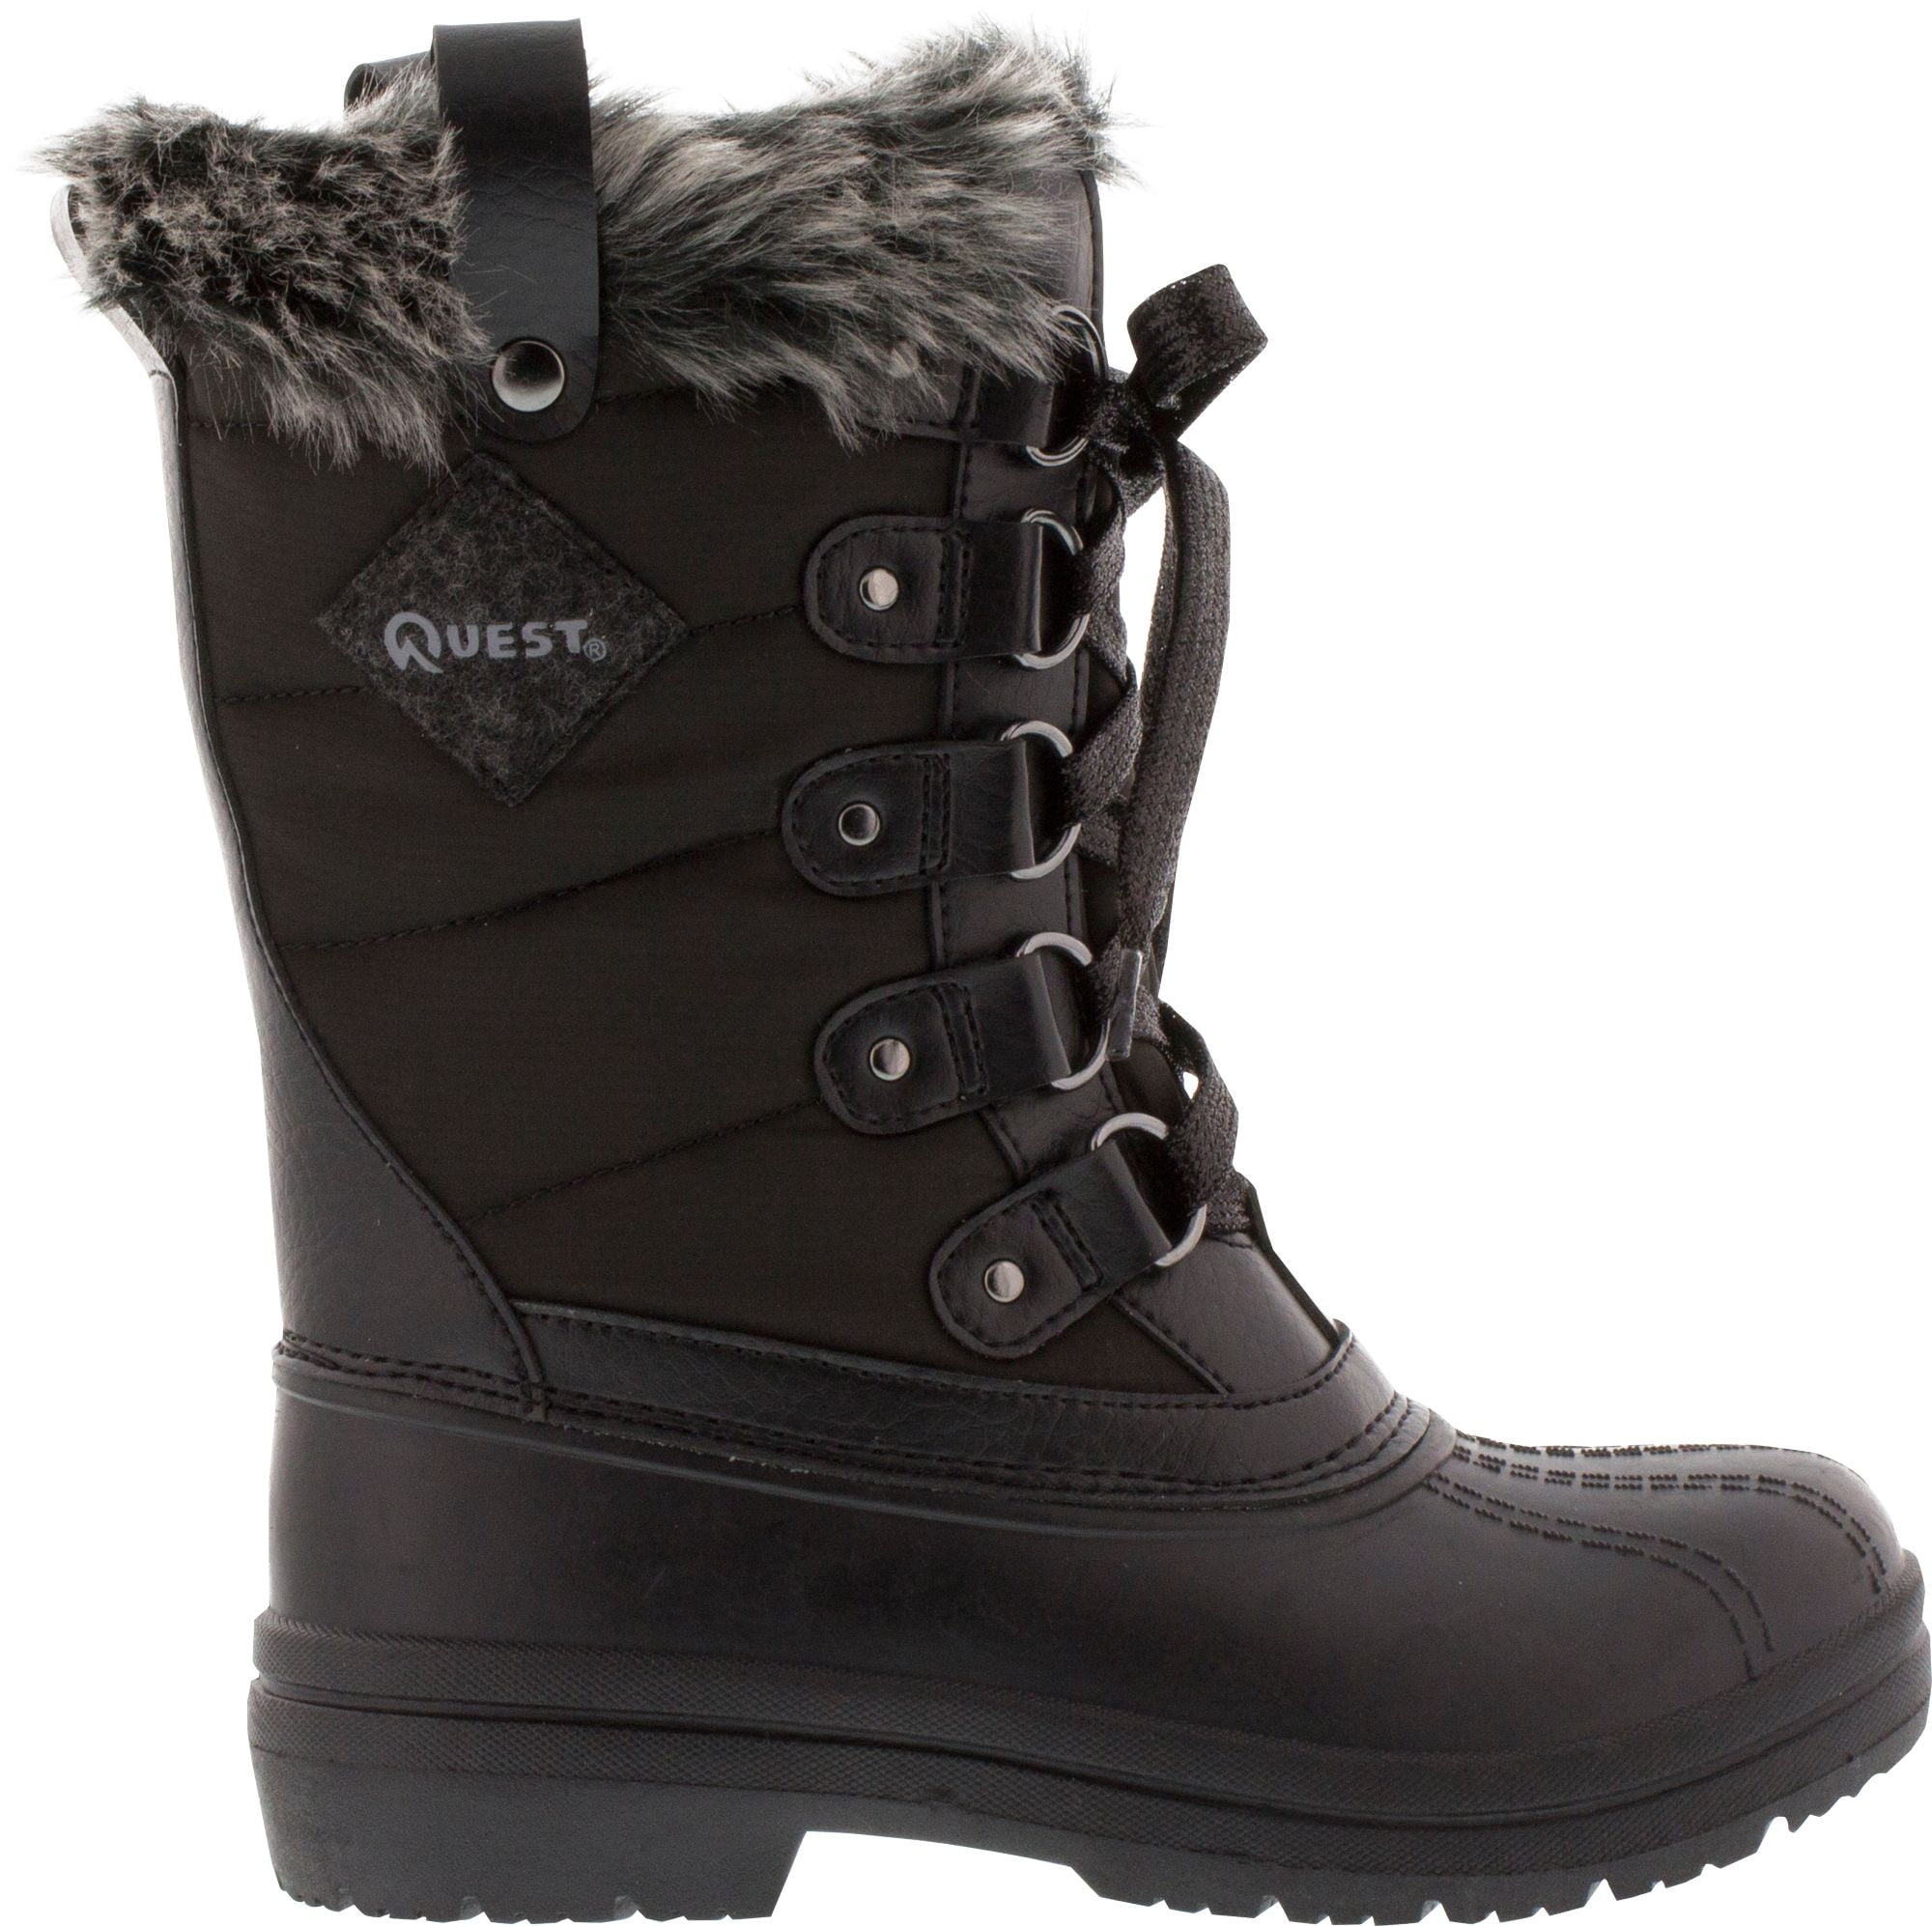 quest winter boots